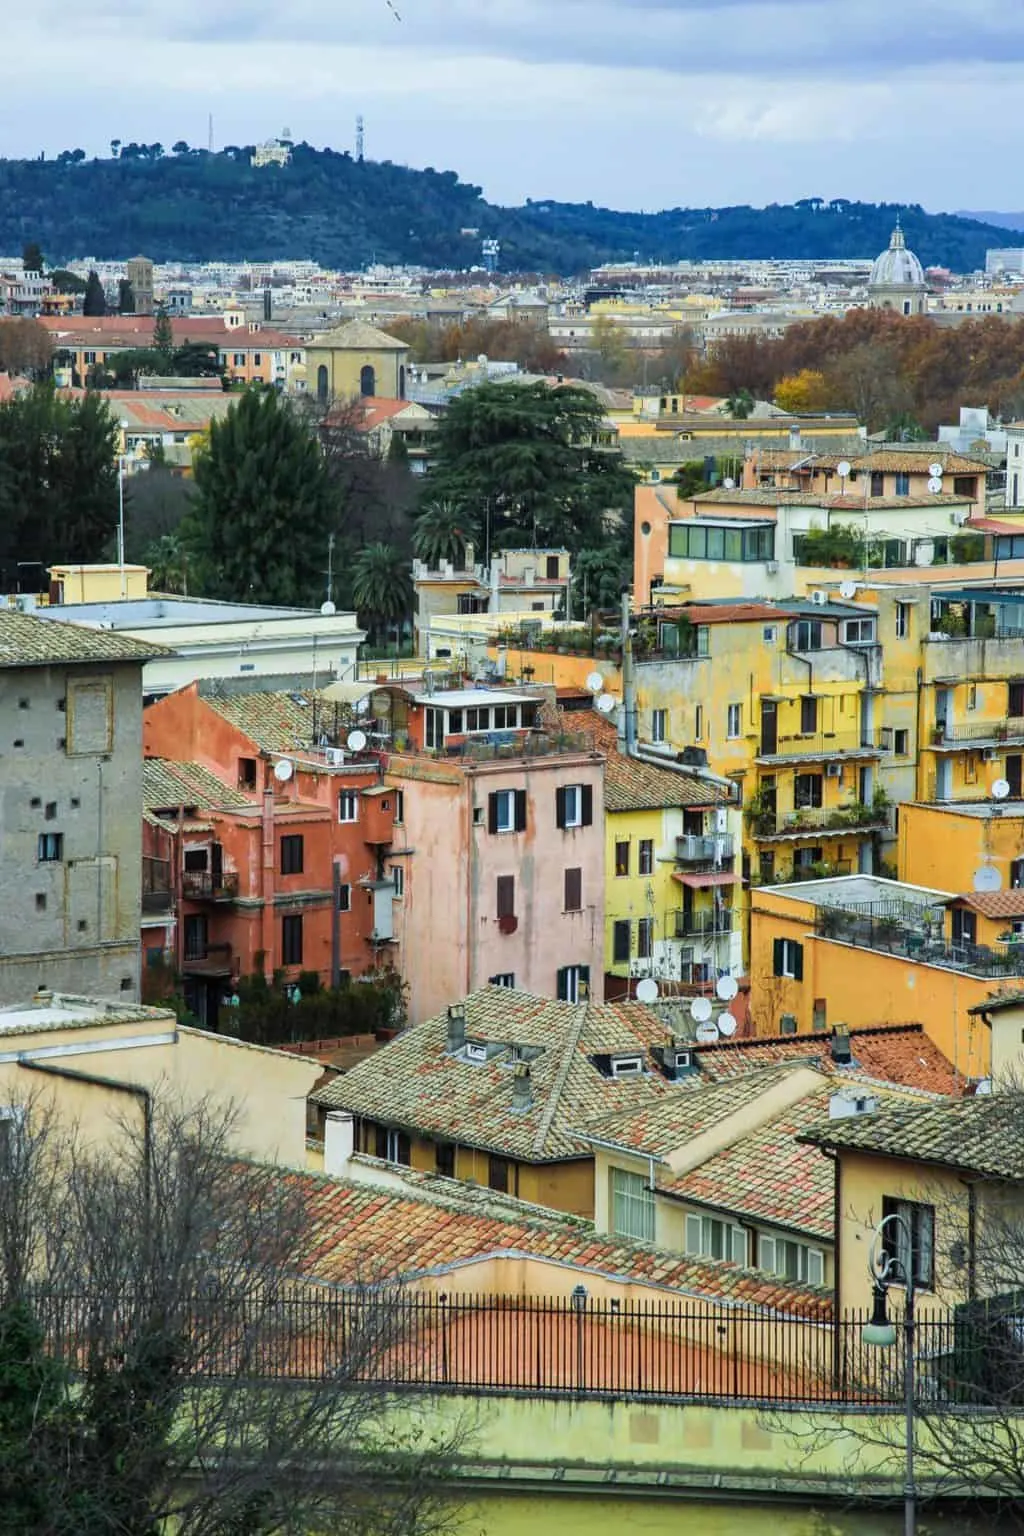 Throughout your 2 day Rome itinerary, make sure to take some time to stop and enjoy the beautiful views of Rome. 